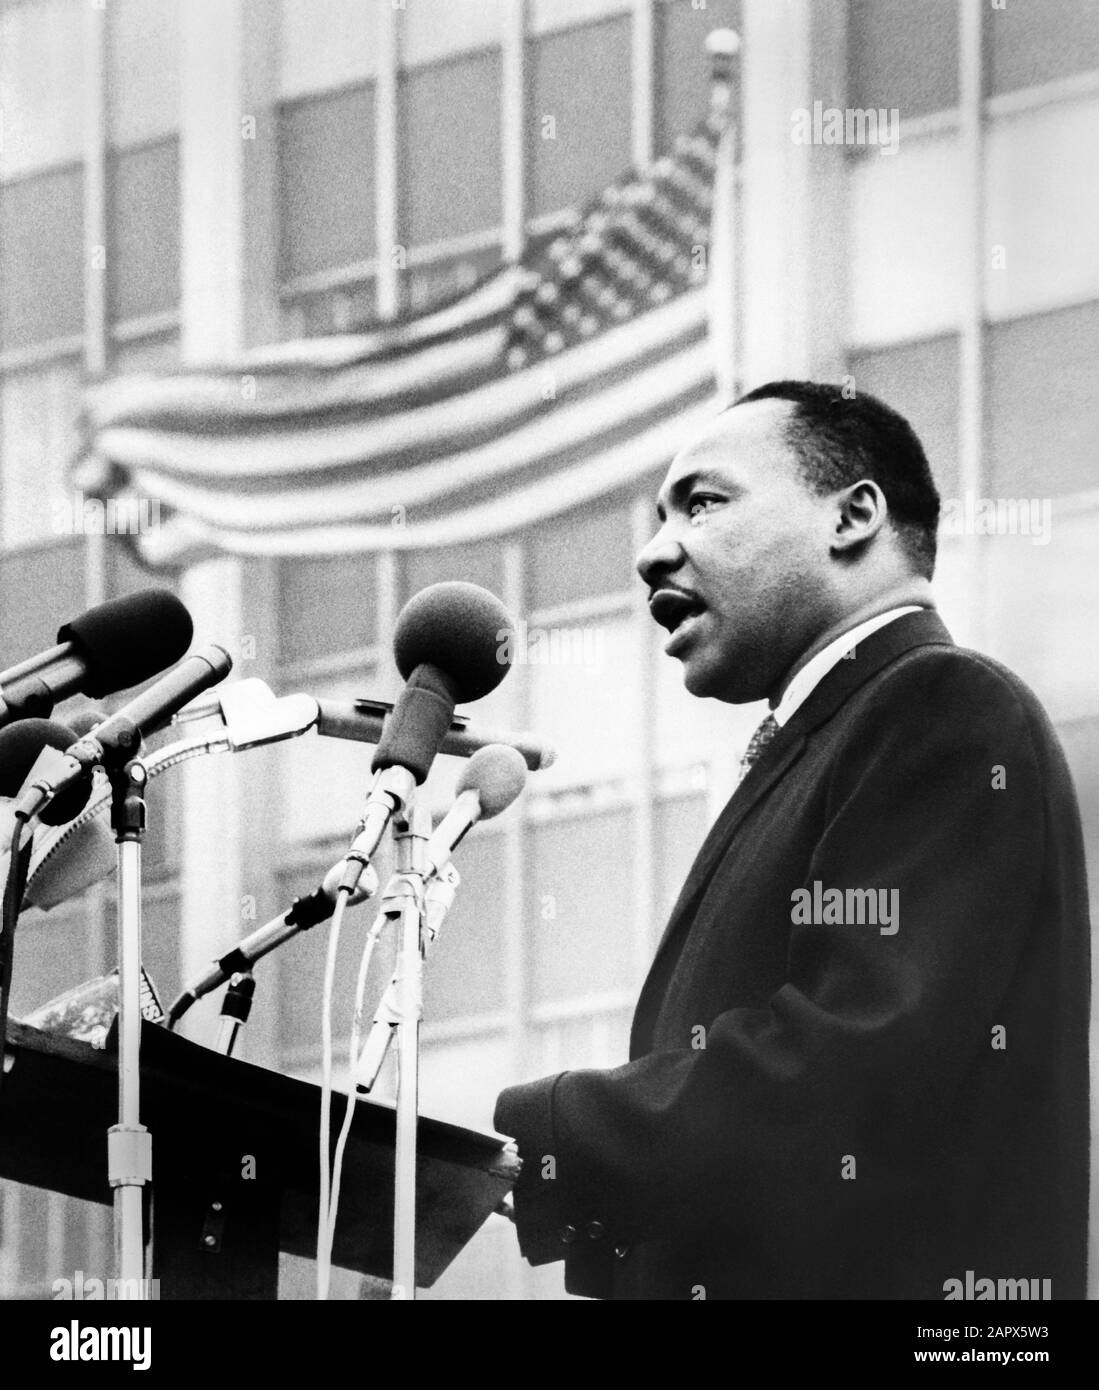 Dr. Martin Luther King, Jr. speaking at microphones during an anti-war demonstration in New York City on April 15, 1967. Stock Photo